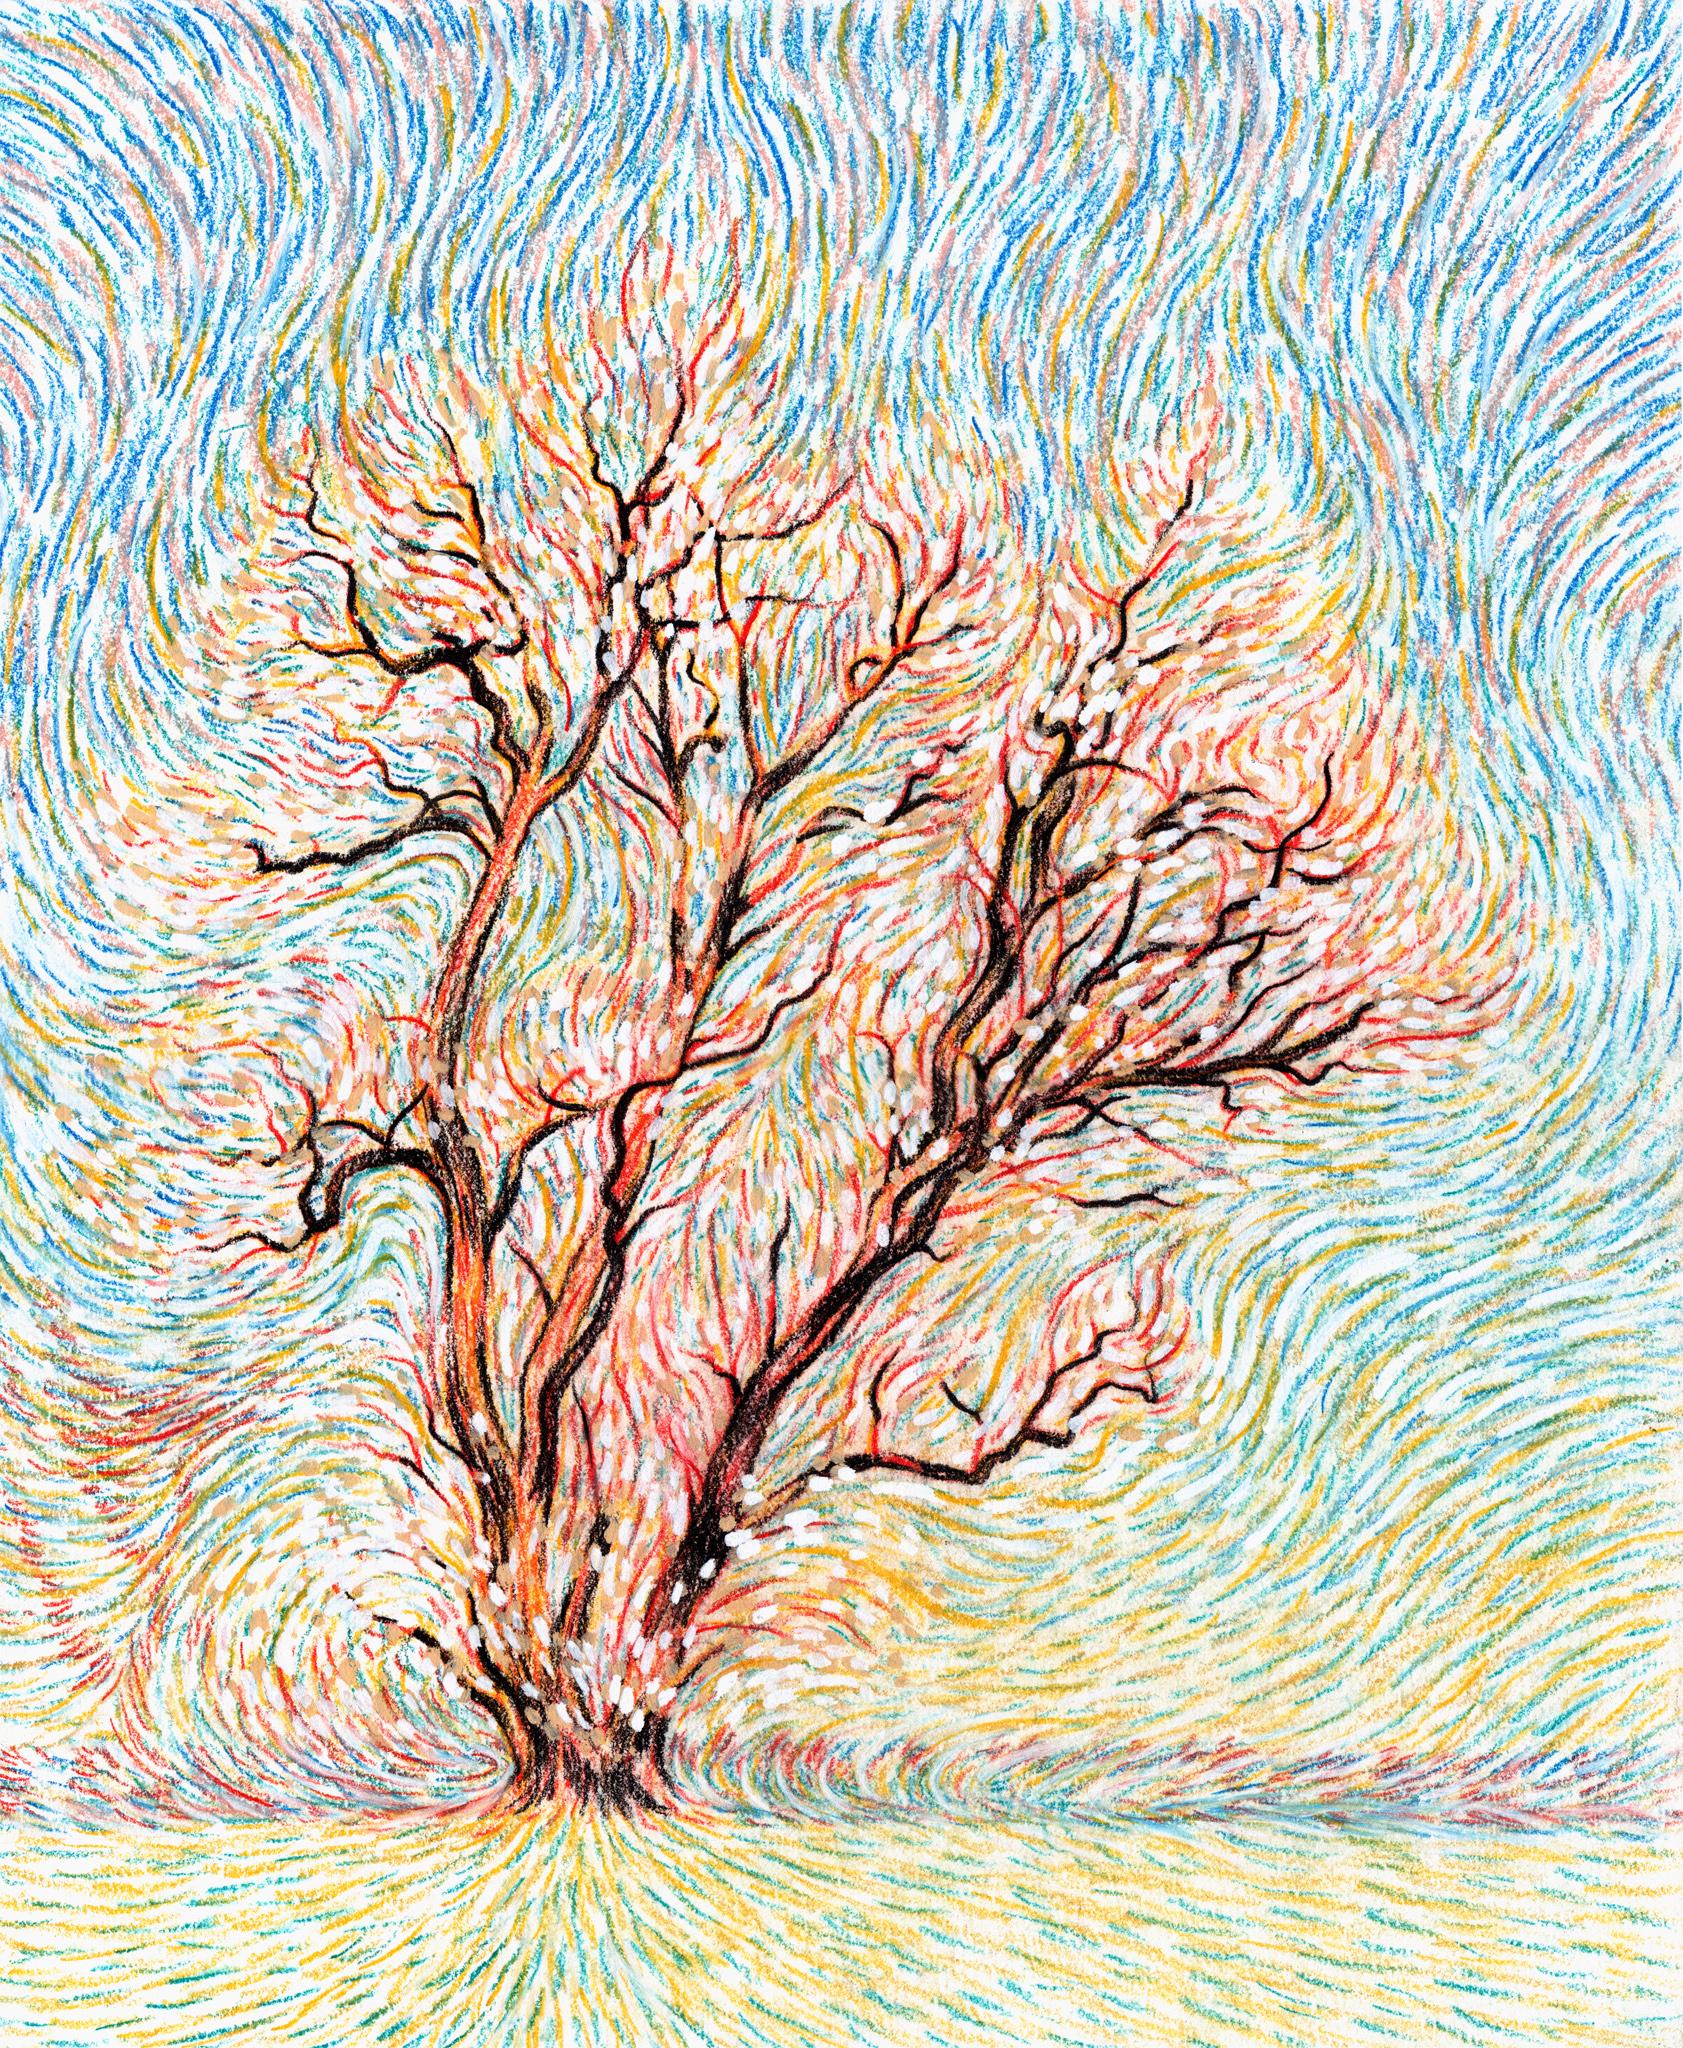 Canadian Contemporary Art by Christian Frederiksen - The Fire Tree